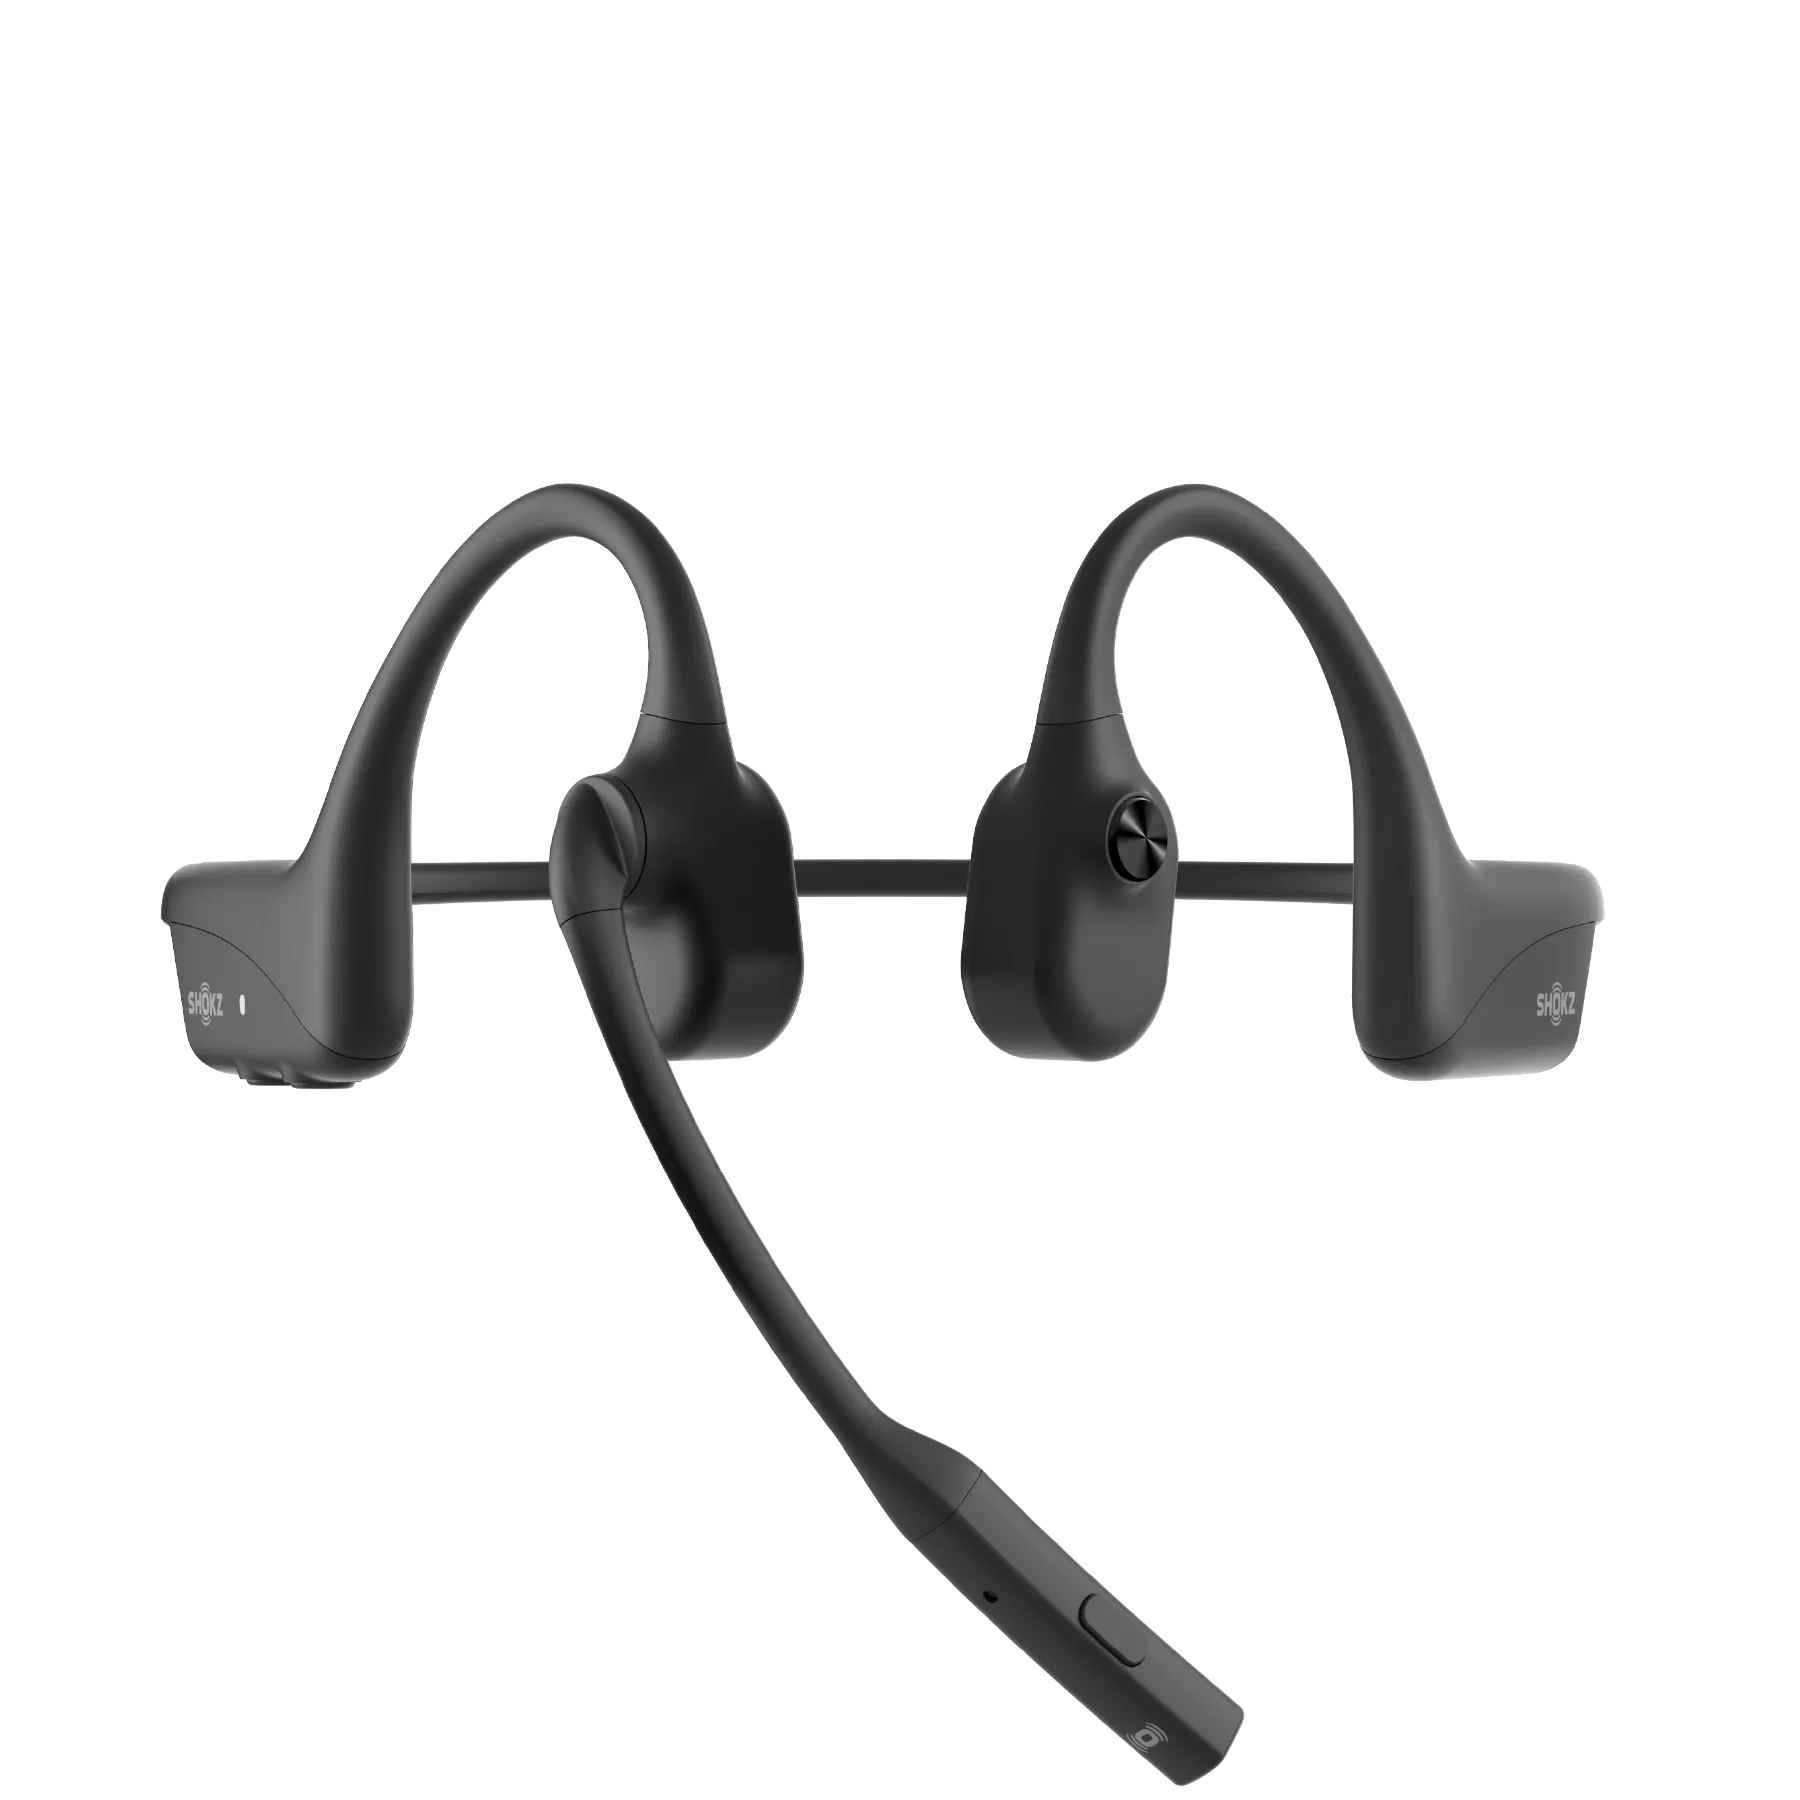 OpenComm2 Bone Conduction Stereo Bluetooth Headset - Best for Work